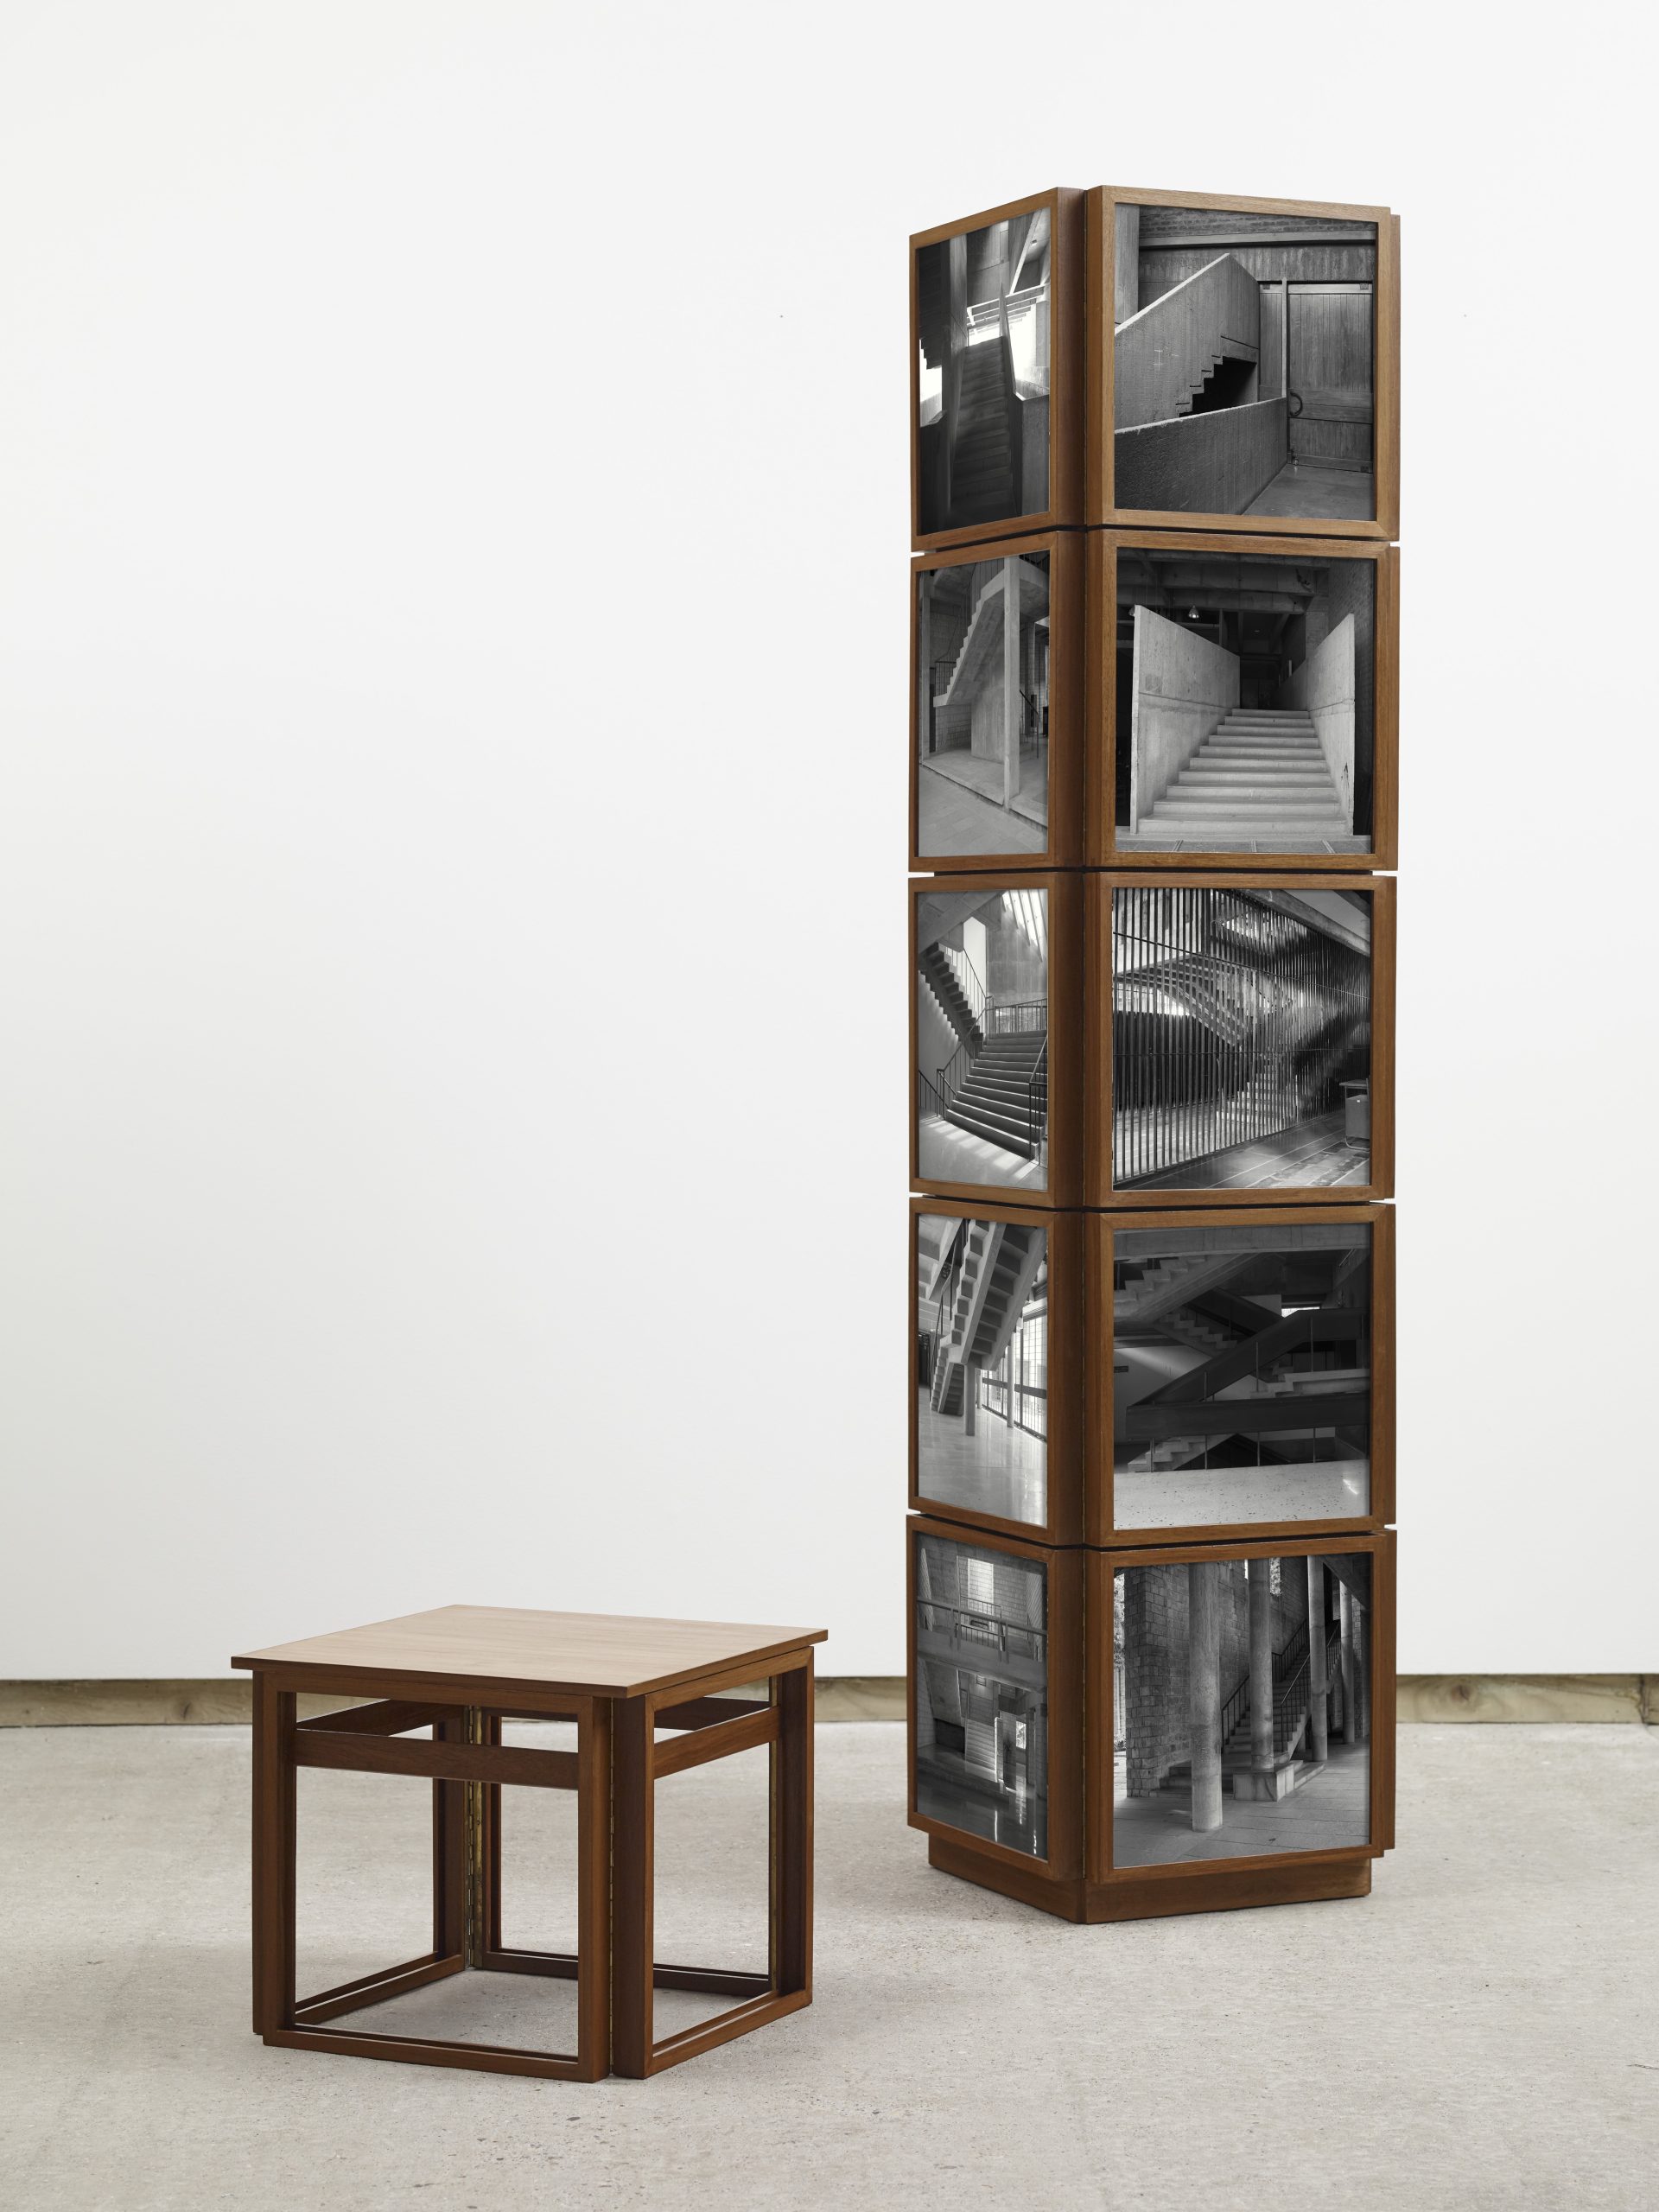 Wooden pillar covered with black and white photos of staircases and accompanying stool